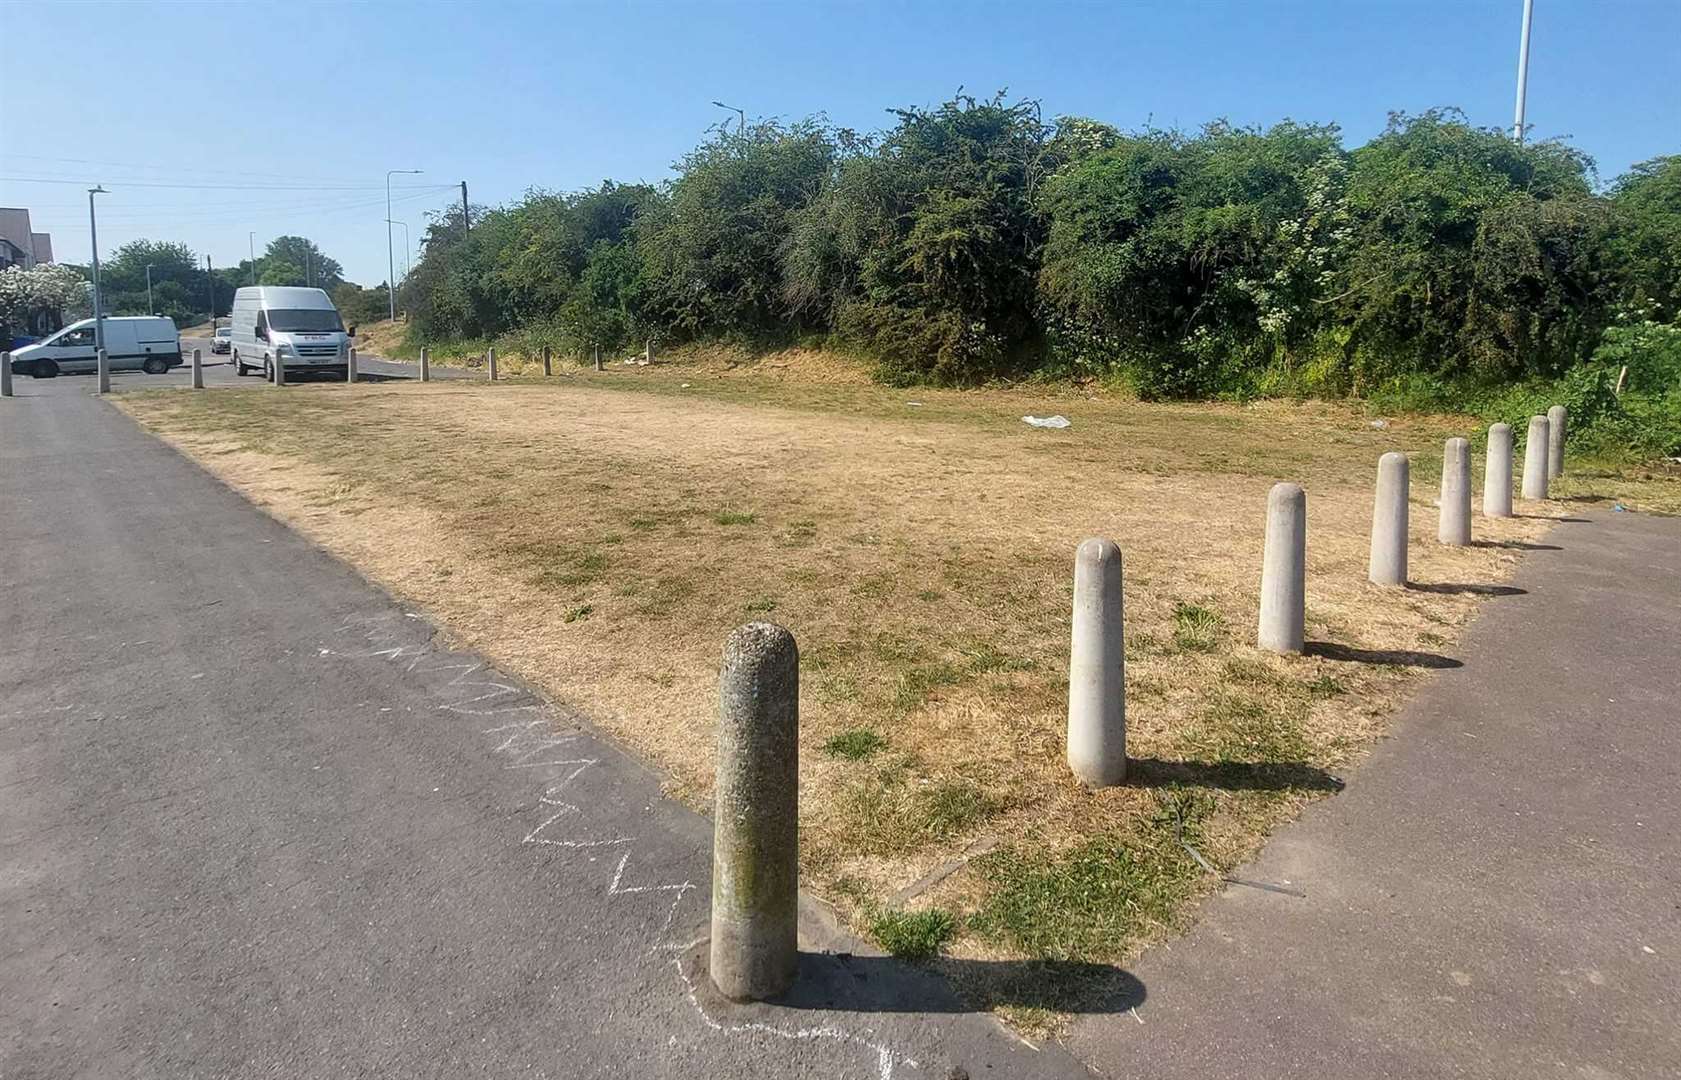 The site of the potential community garden at Quinton, Sittingbourne. Picture: James Hunt